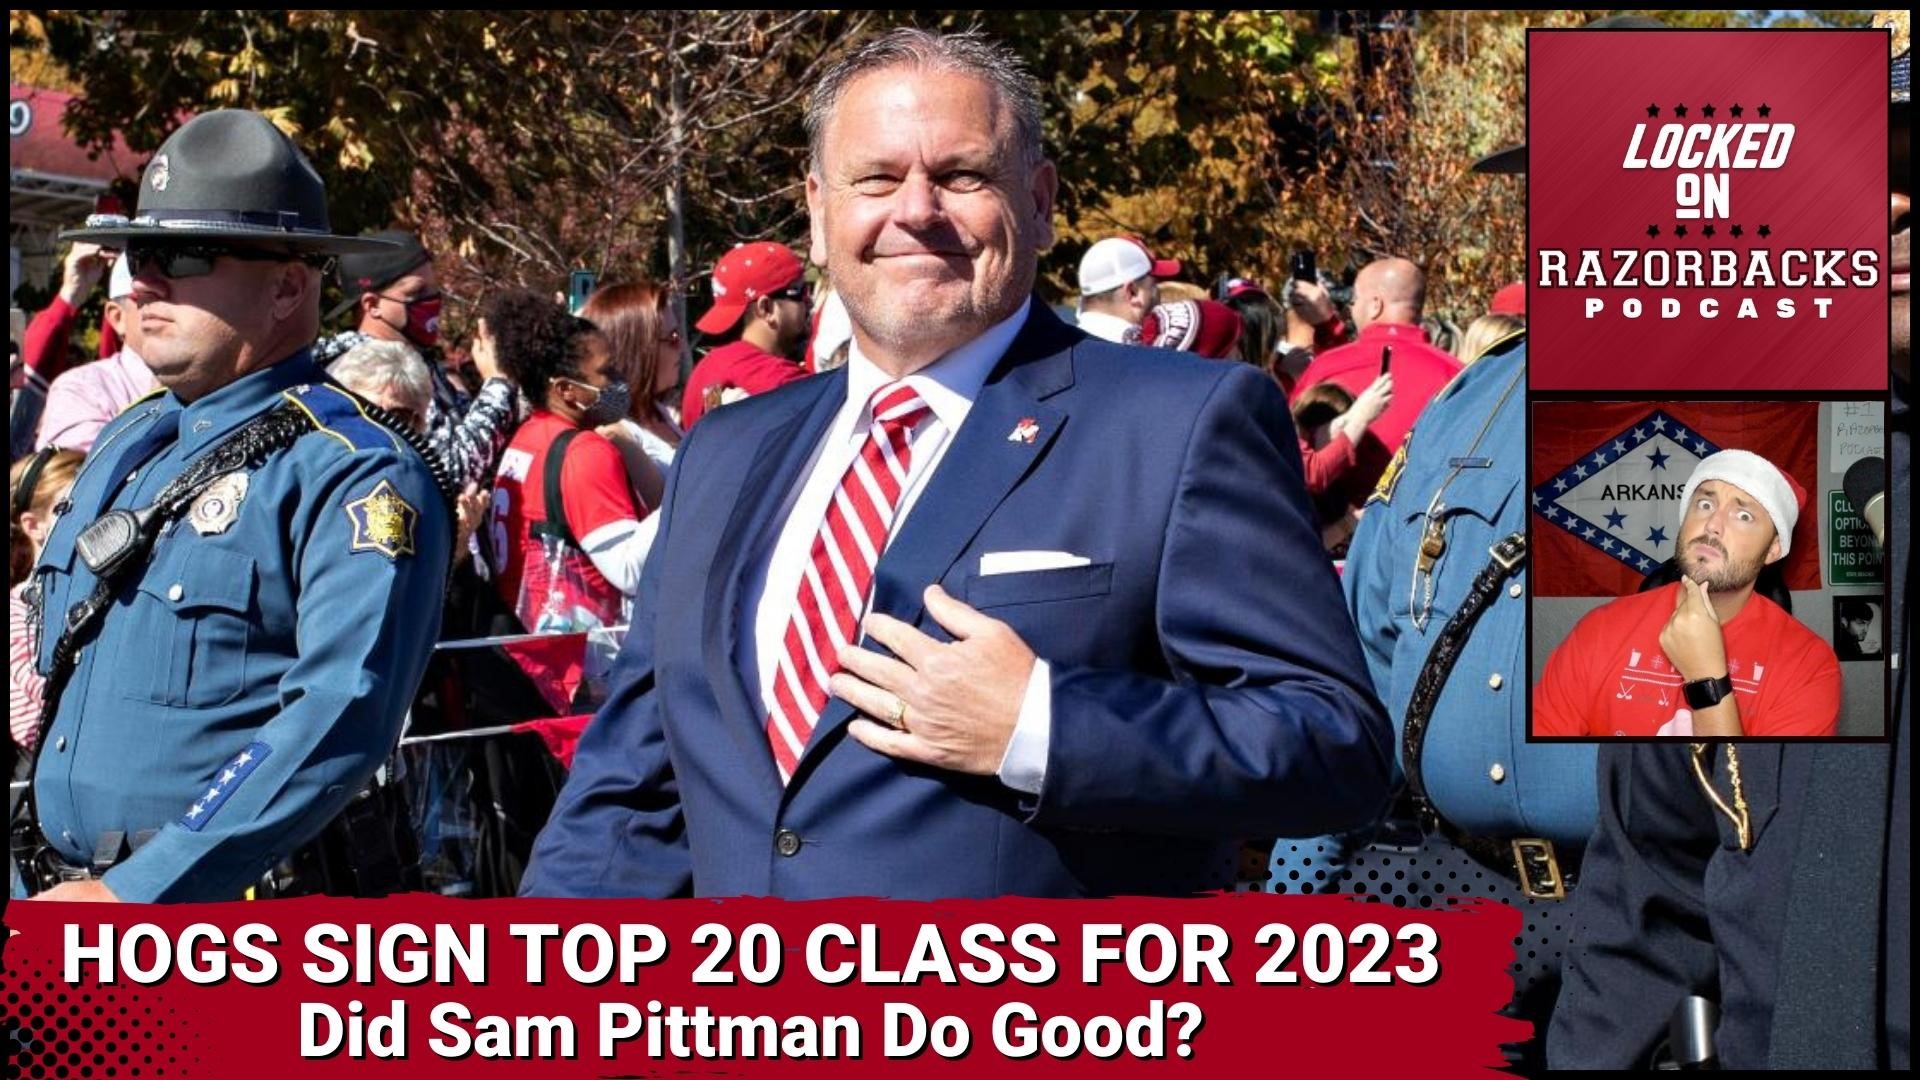 John Nabors reacts to the 2023 high school recruiting class that Sam Pittman signed with the Razorbacks.